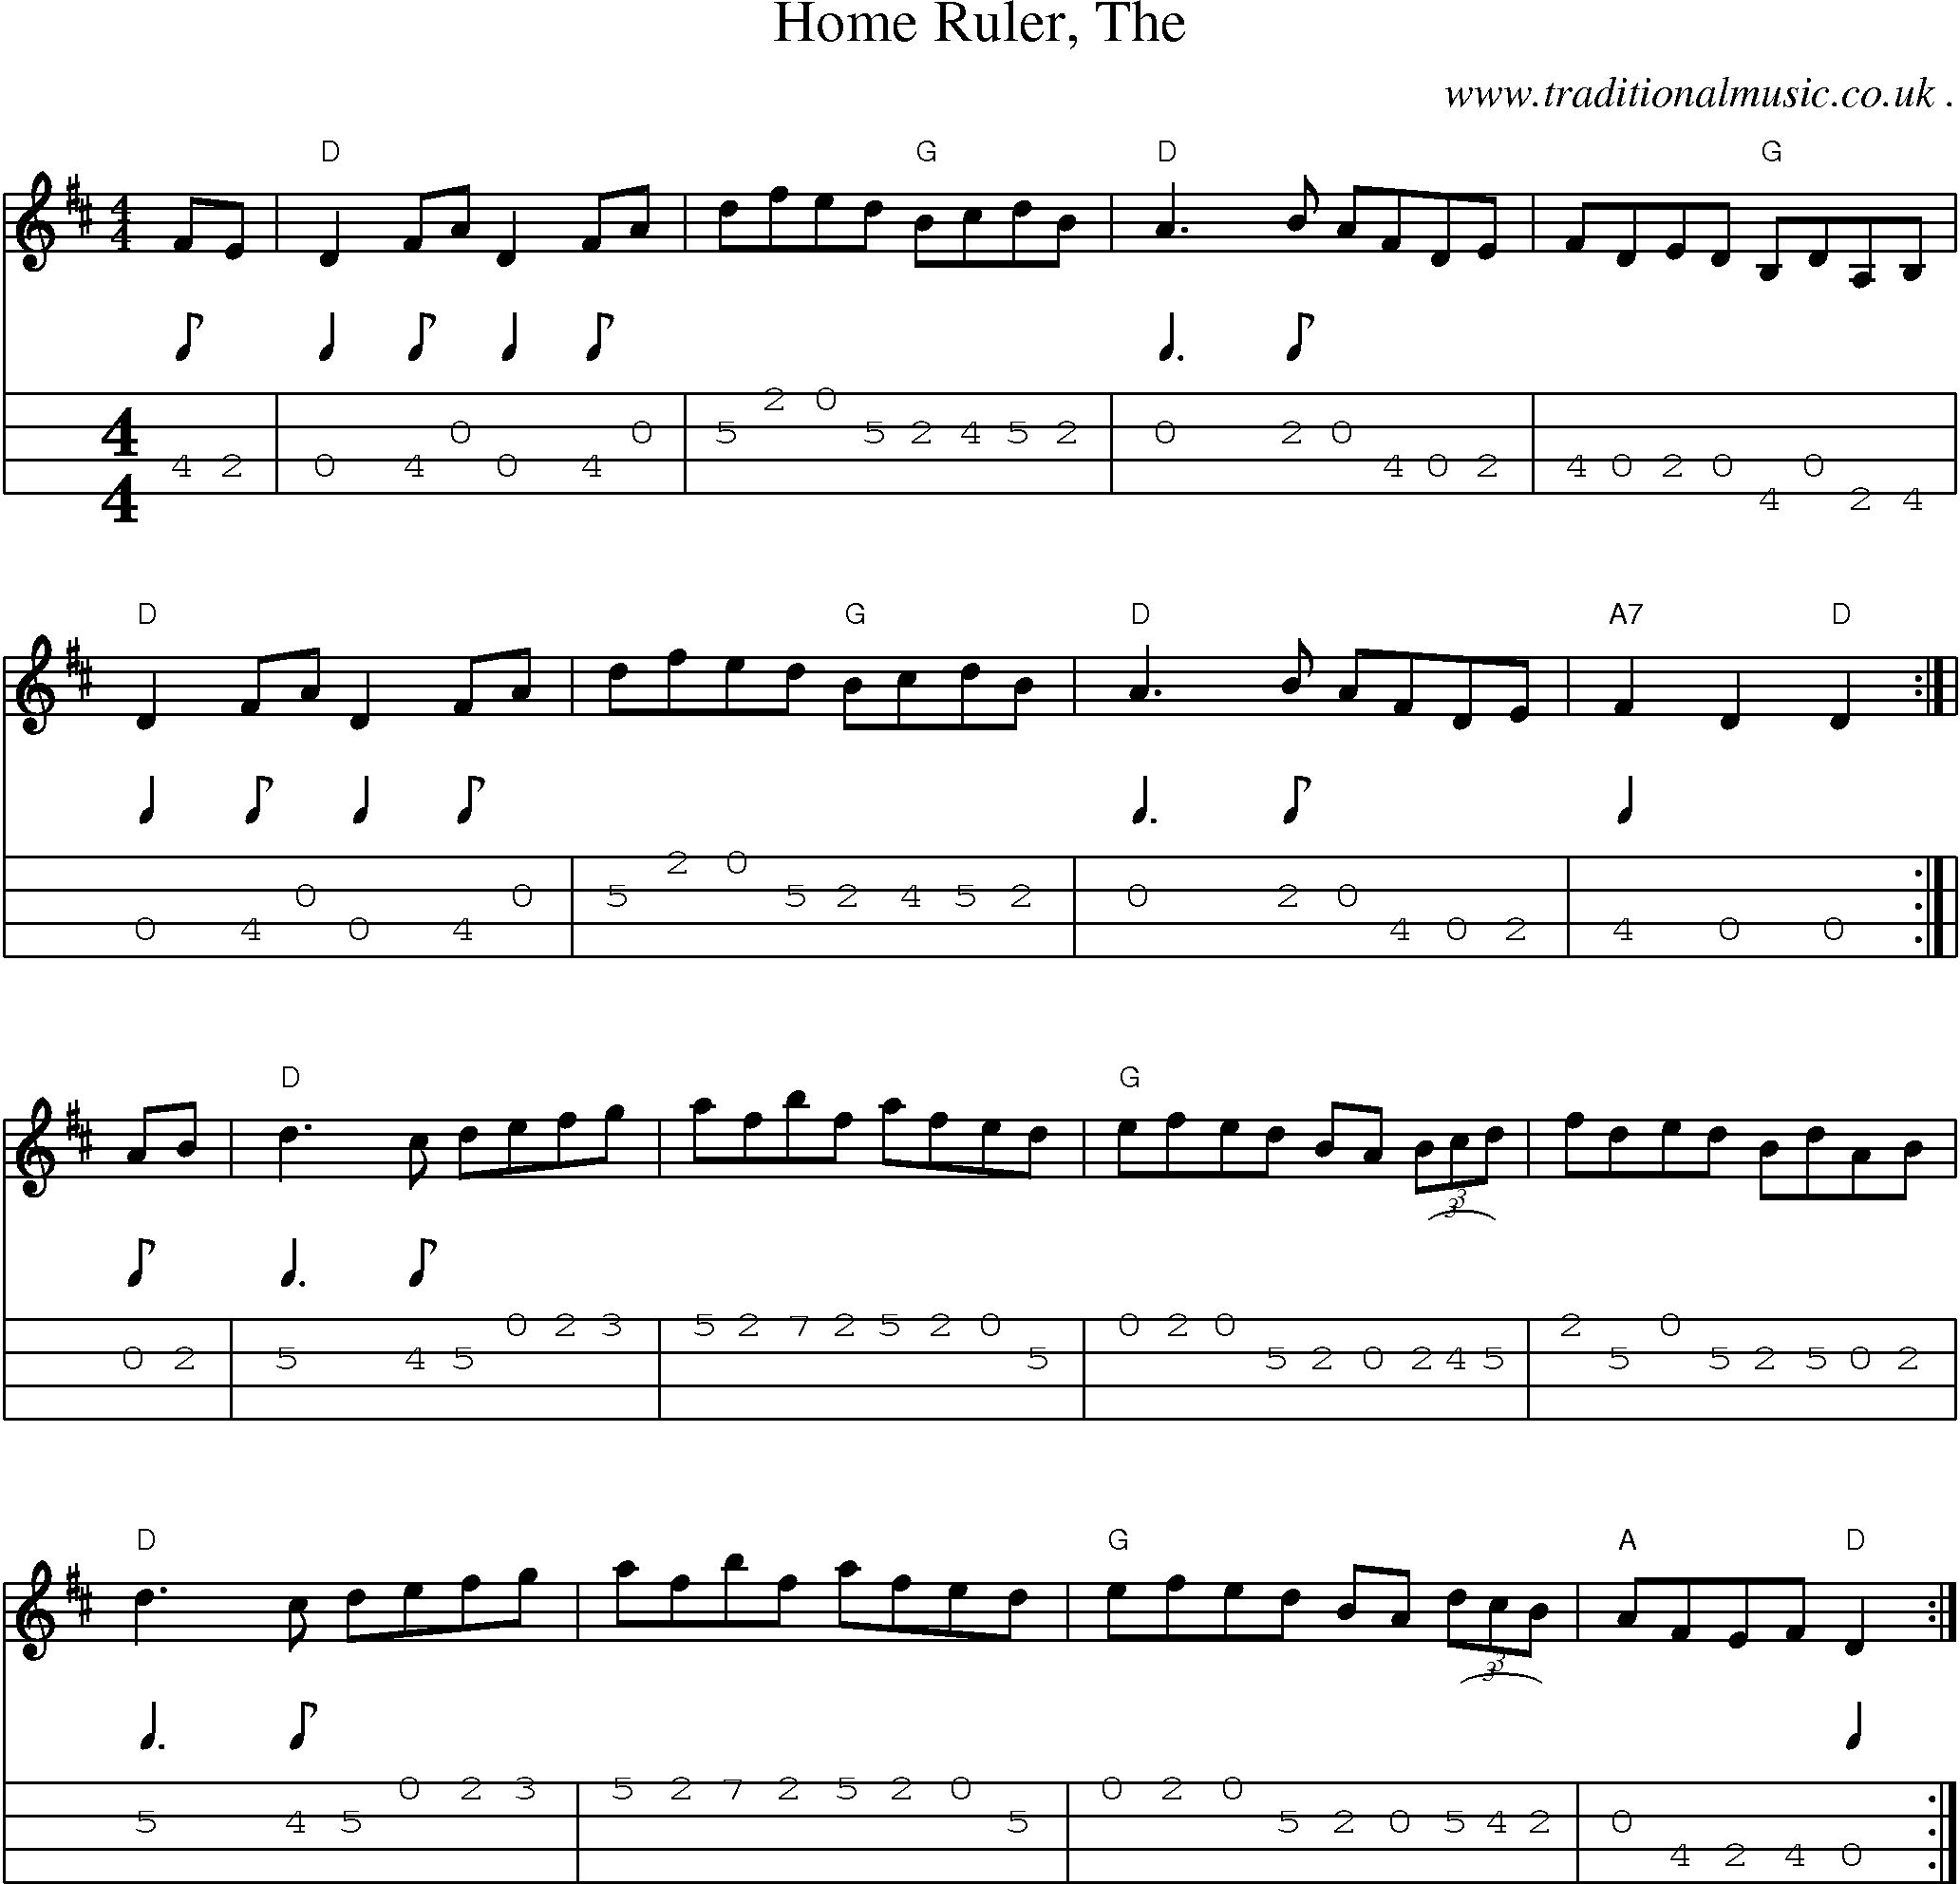 Music Score and Guitar Tabs for Home Ruler The